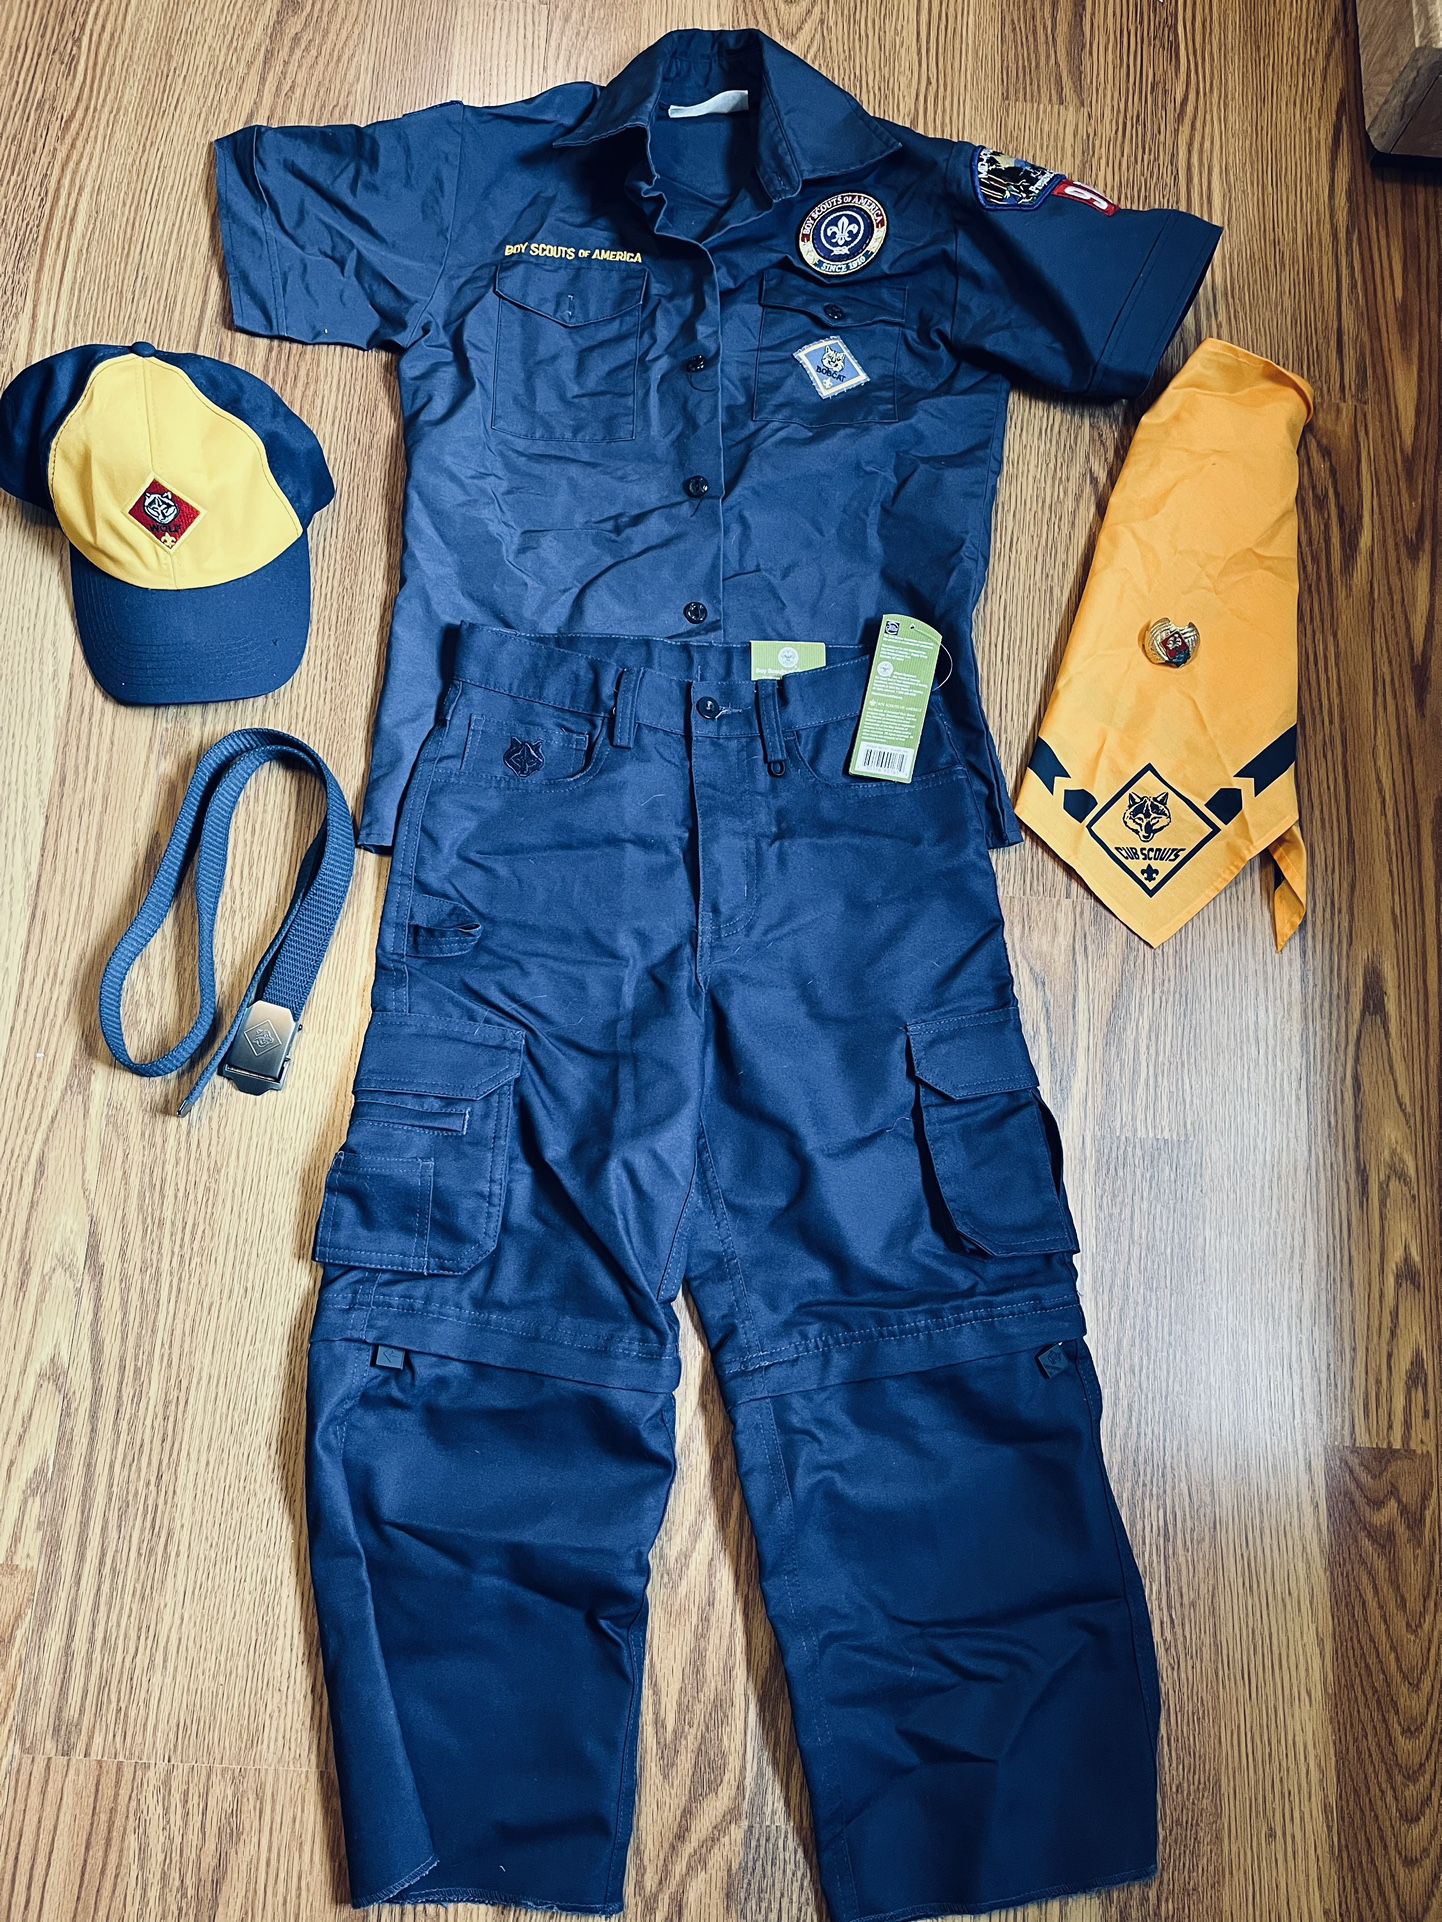 Boys Scouts Outfit Size 6